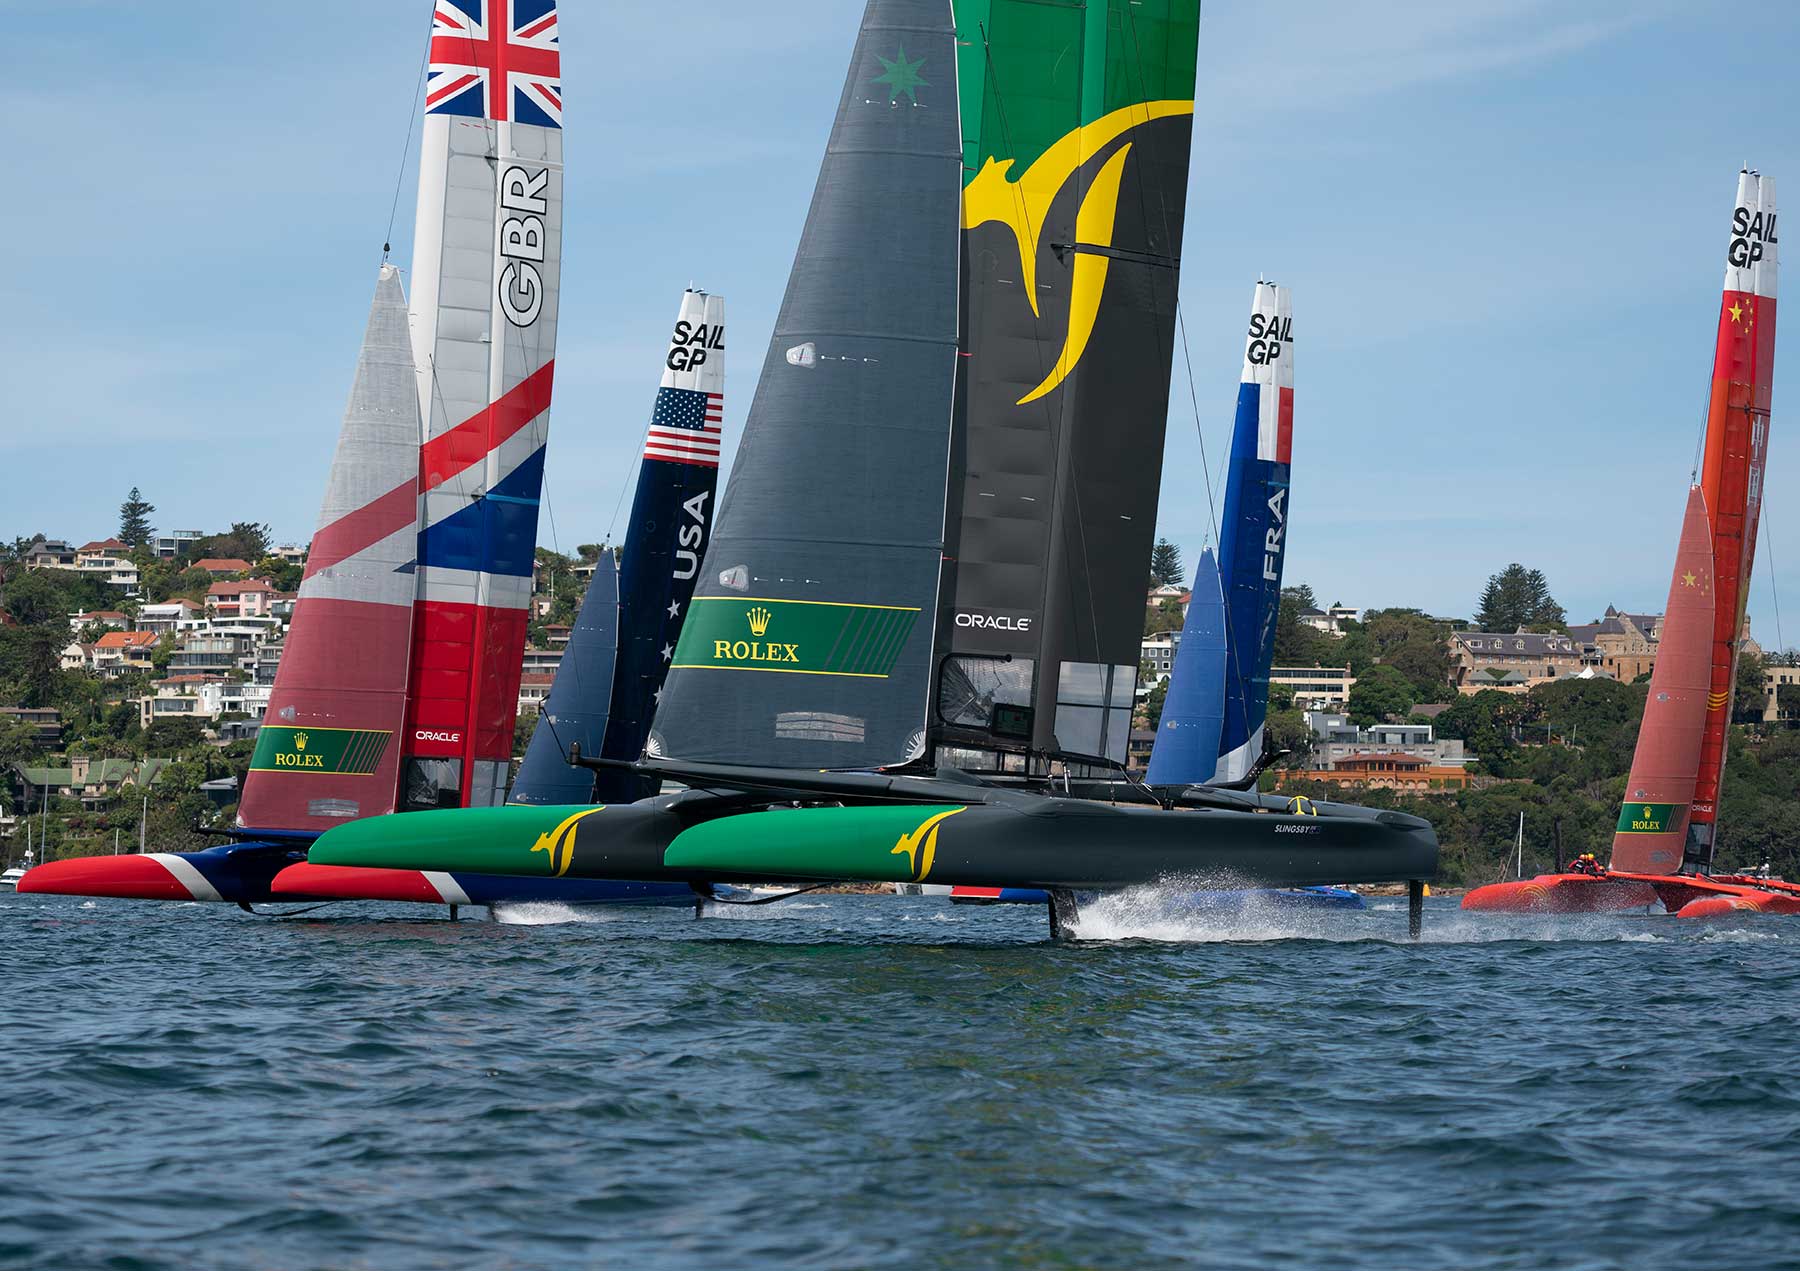 Australia SAILGP Team skippered by Tom Slingsby moves away from the pack in Sydney Harbour, Sydney, Australia.Photo: Bob Martin for SailGP